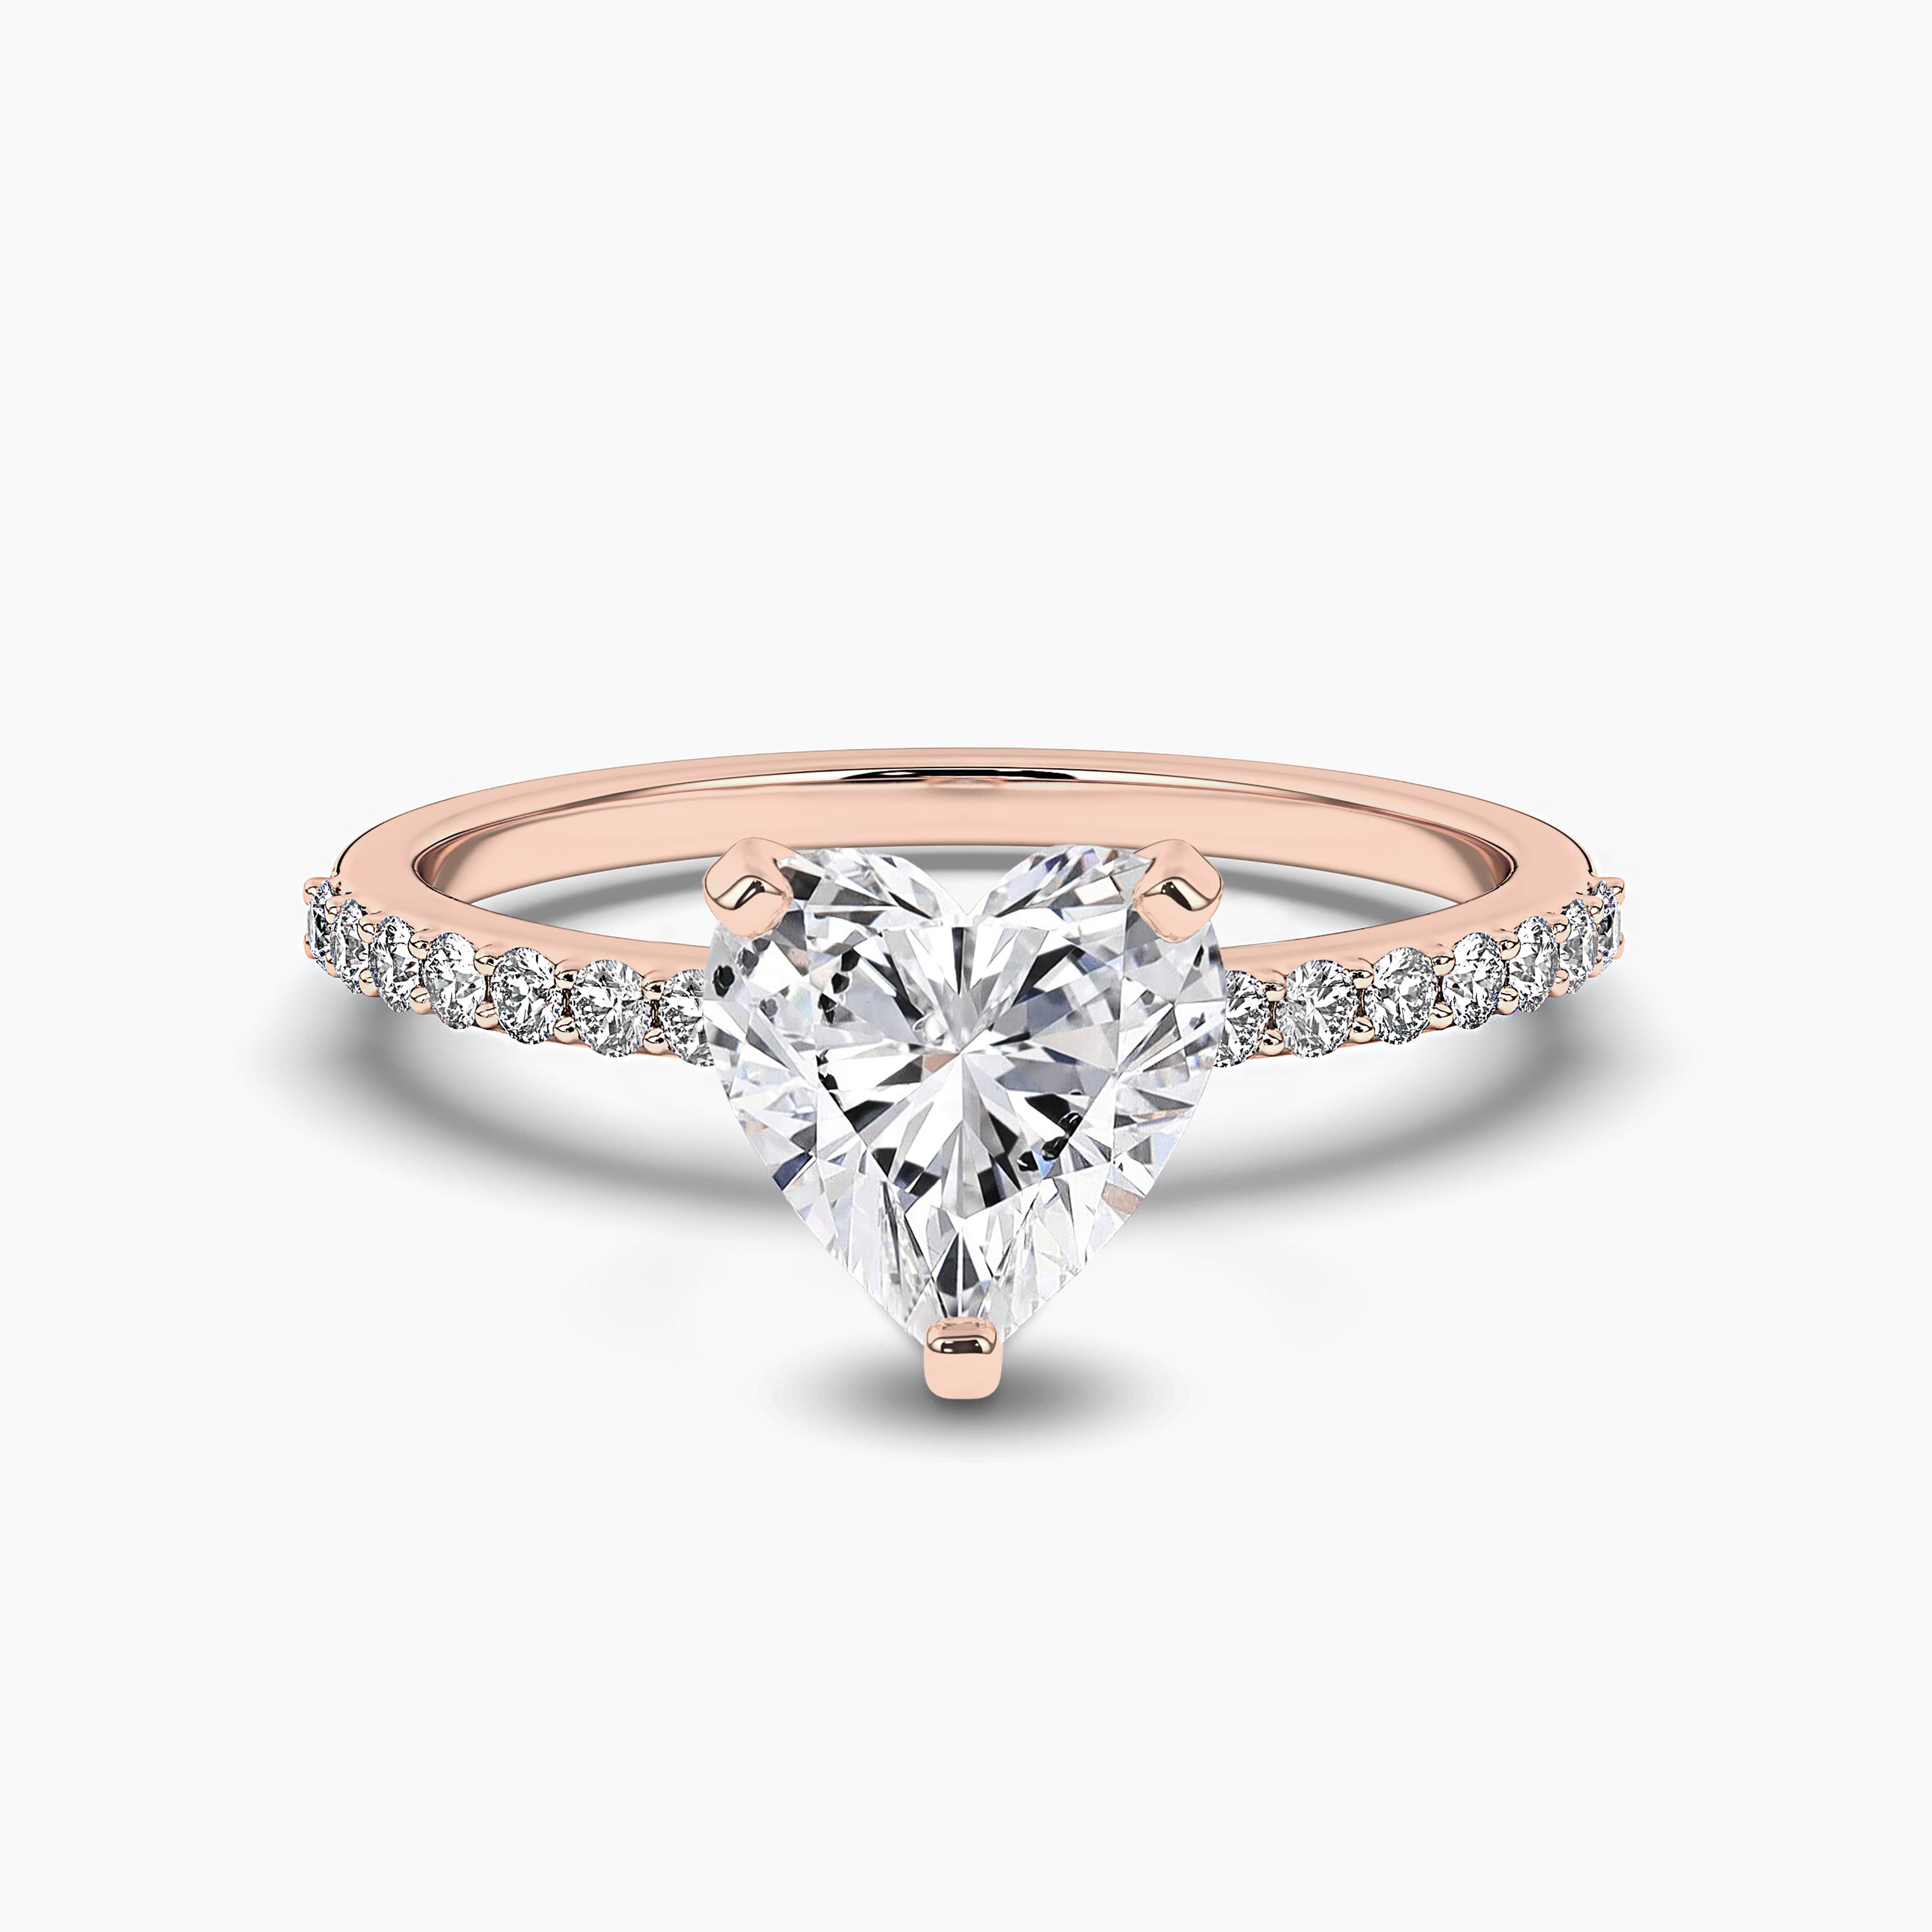 HEART SHAPED DIAMOND ENGAGEMENT RING IN ROSE GOLD